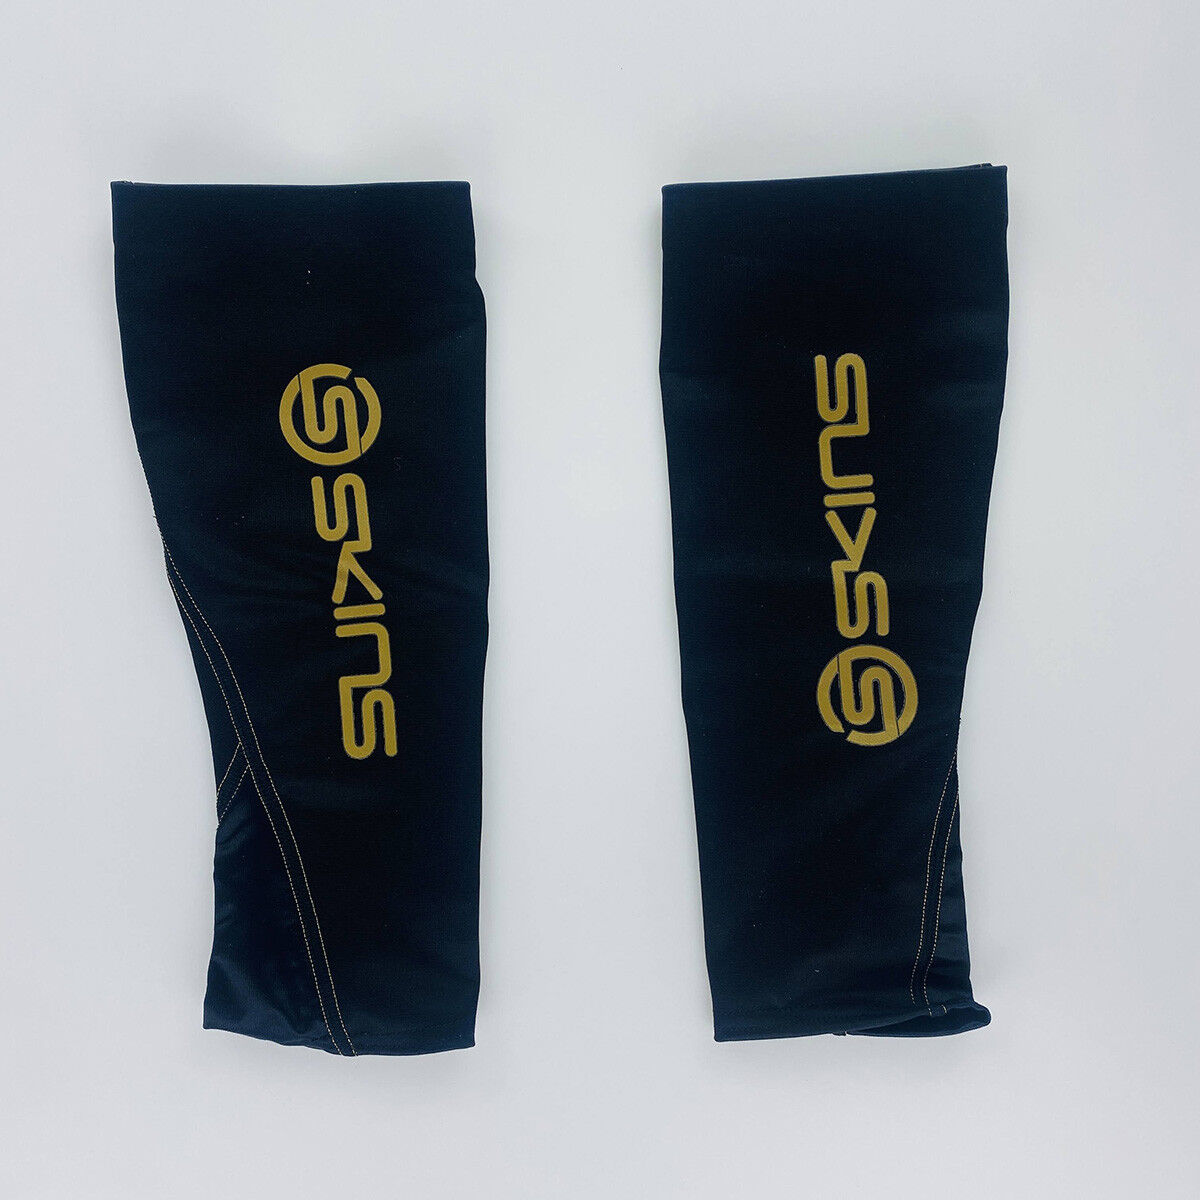 Skins Calf Tights Mx - Seconde main Chaussettes running - Noir - XS | Hardloop